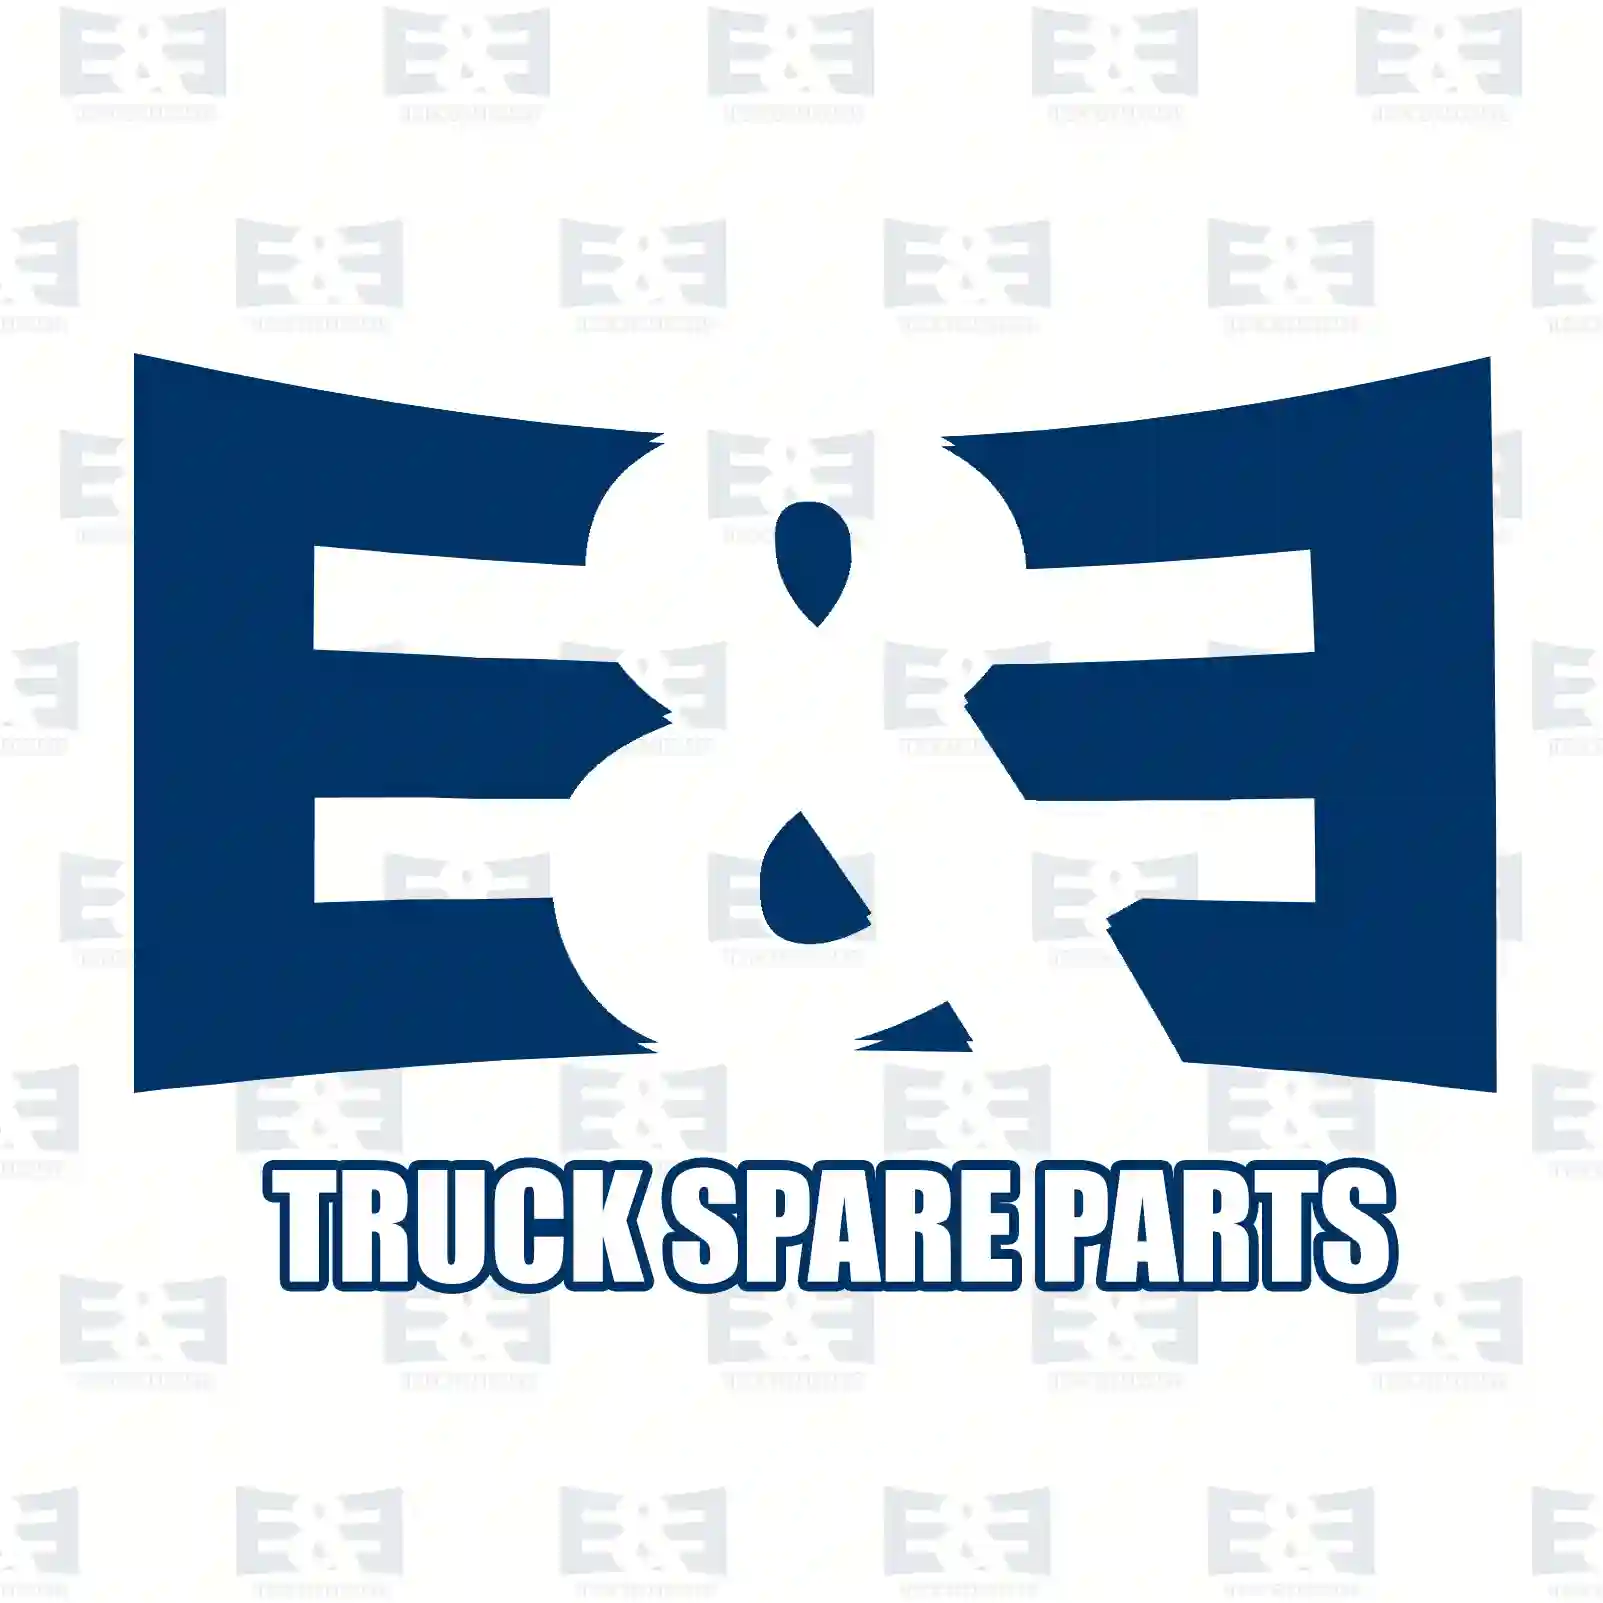  Brake master cylinder, without container || E&E Truck Spare Parts | Truck Spare Parts, Auotomotive Spare Parts